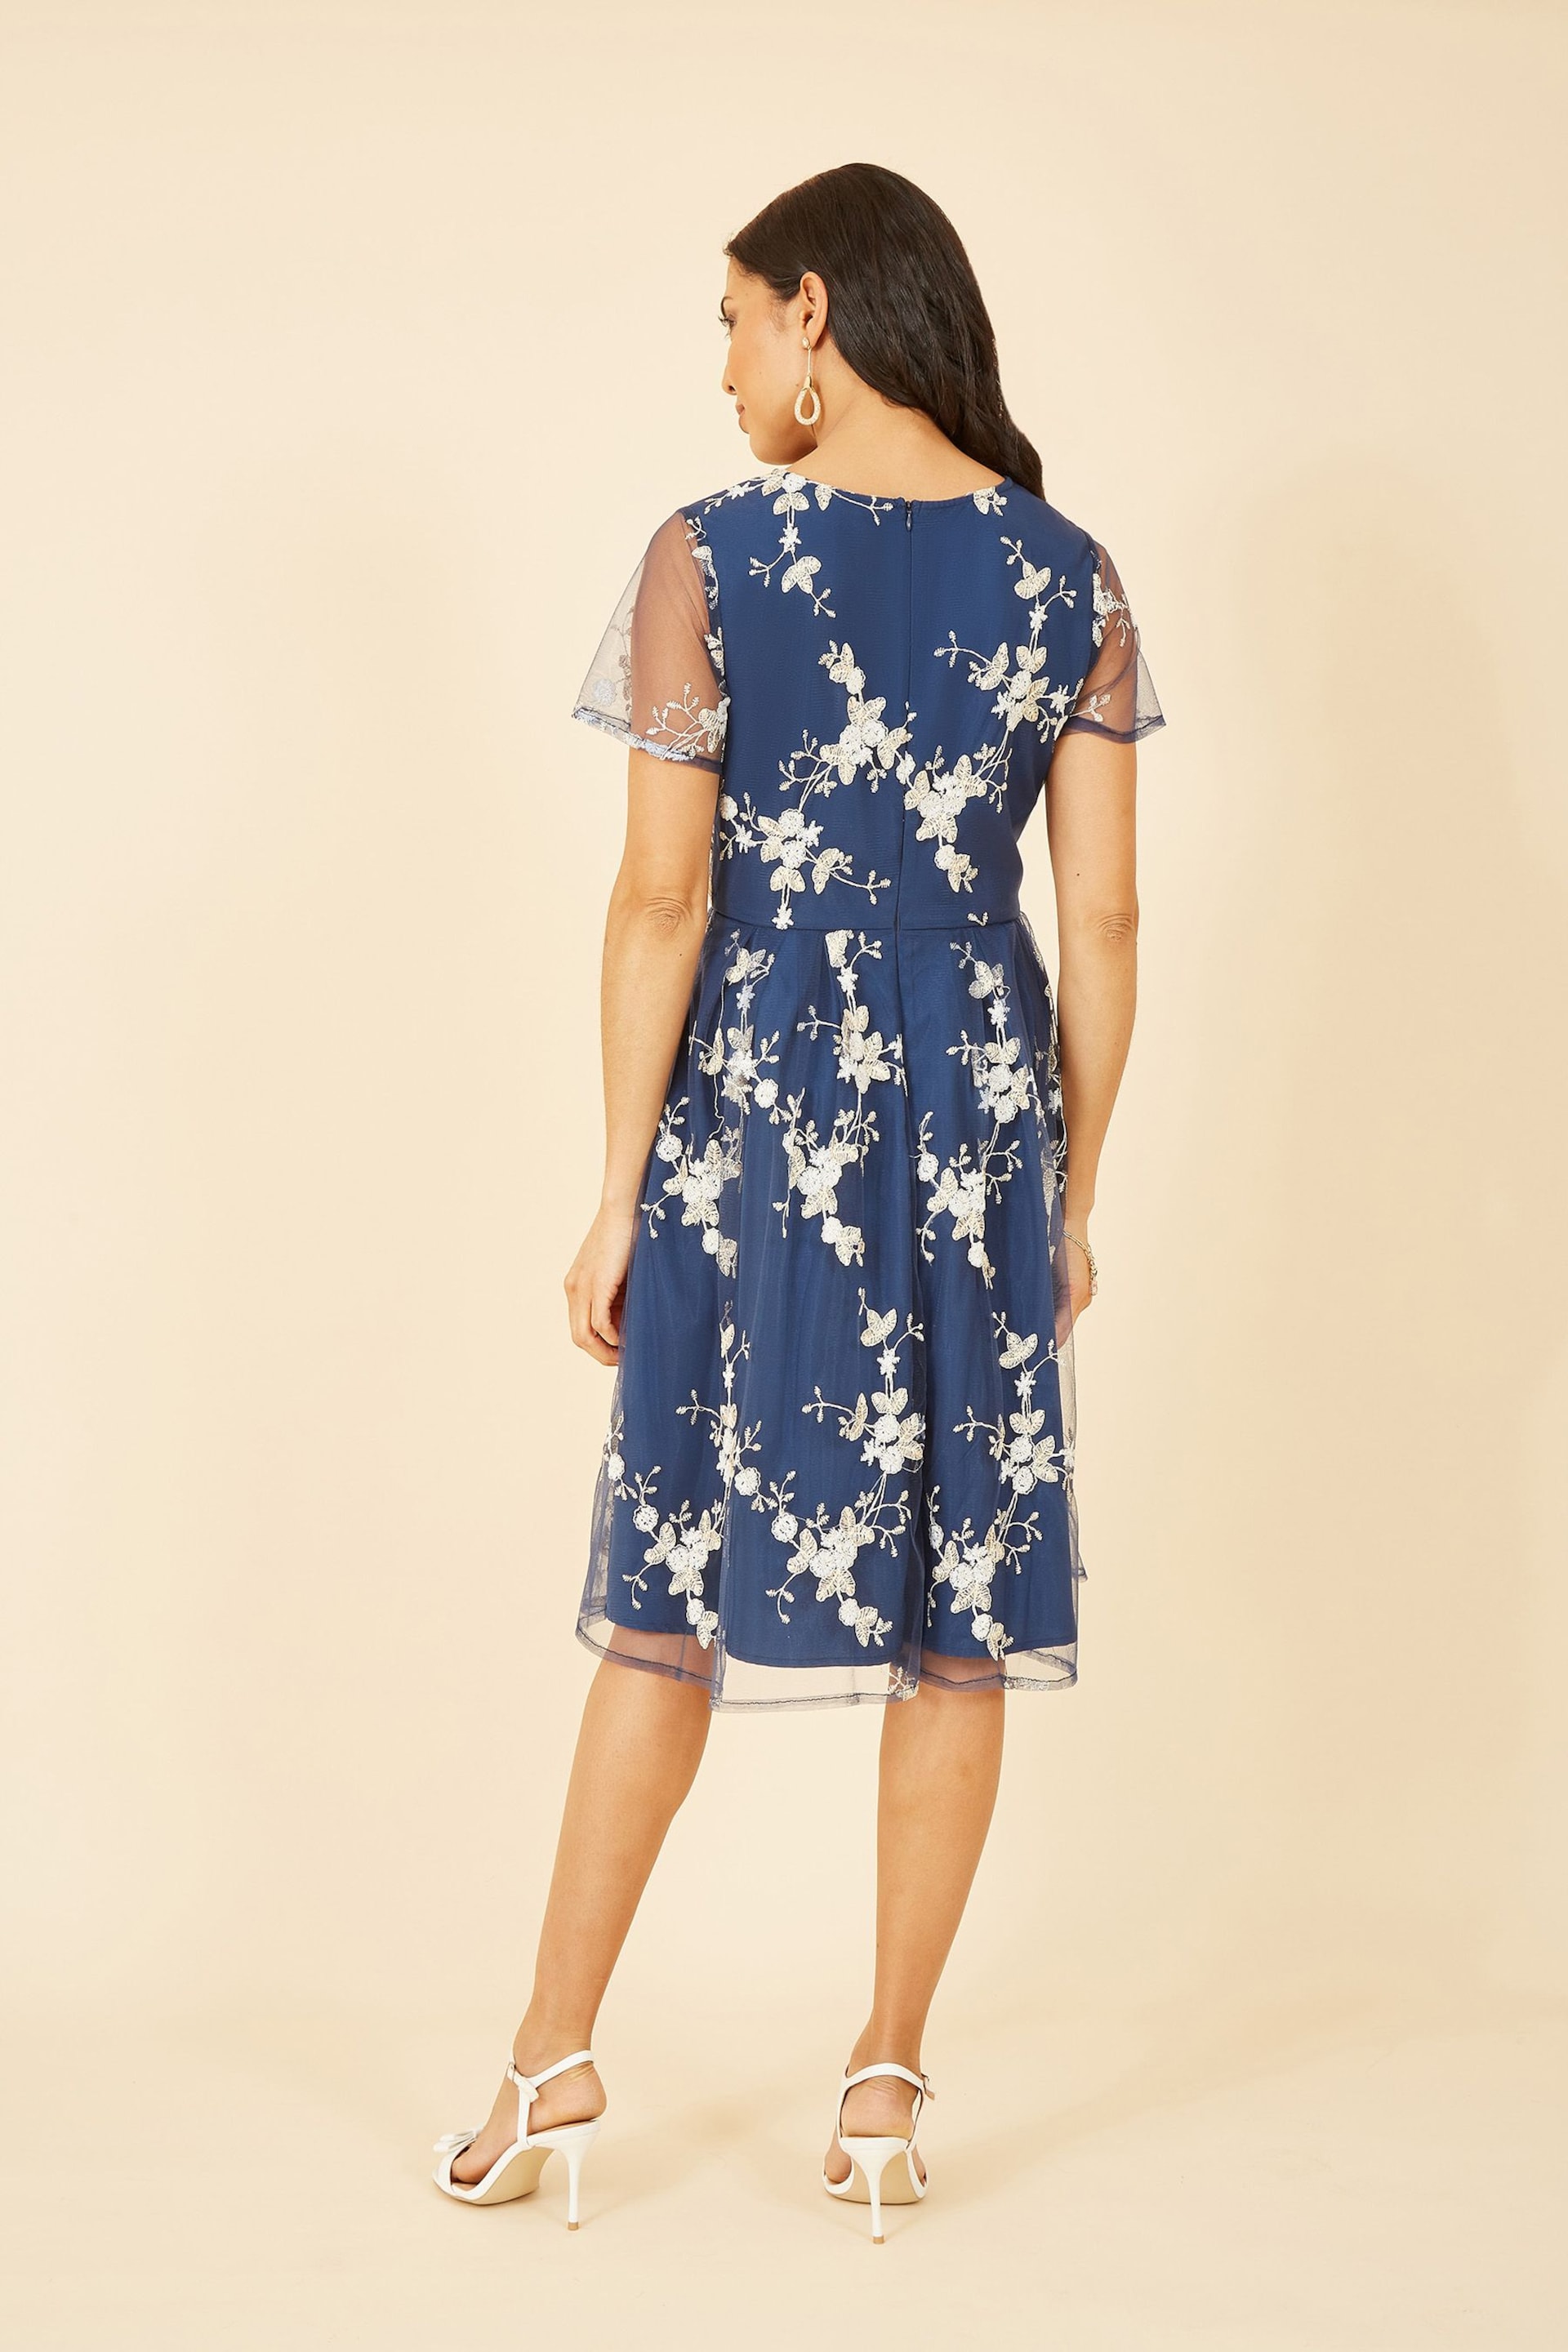 Yumi Blue Embroidered Floral Skater Dress - Image 4 of 5